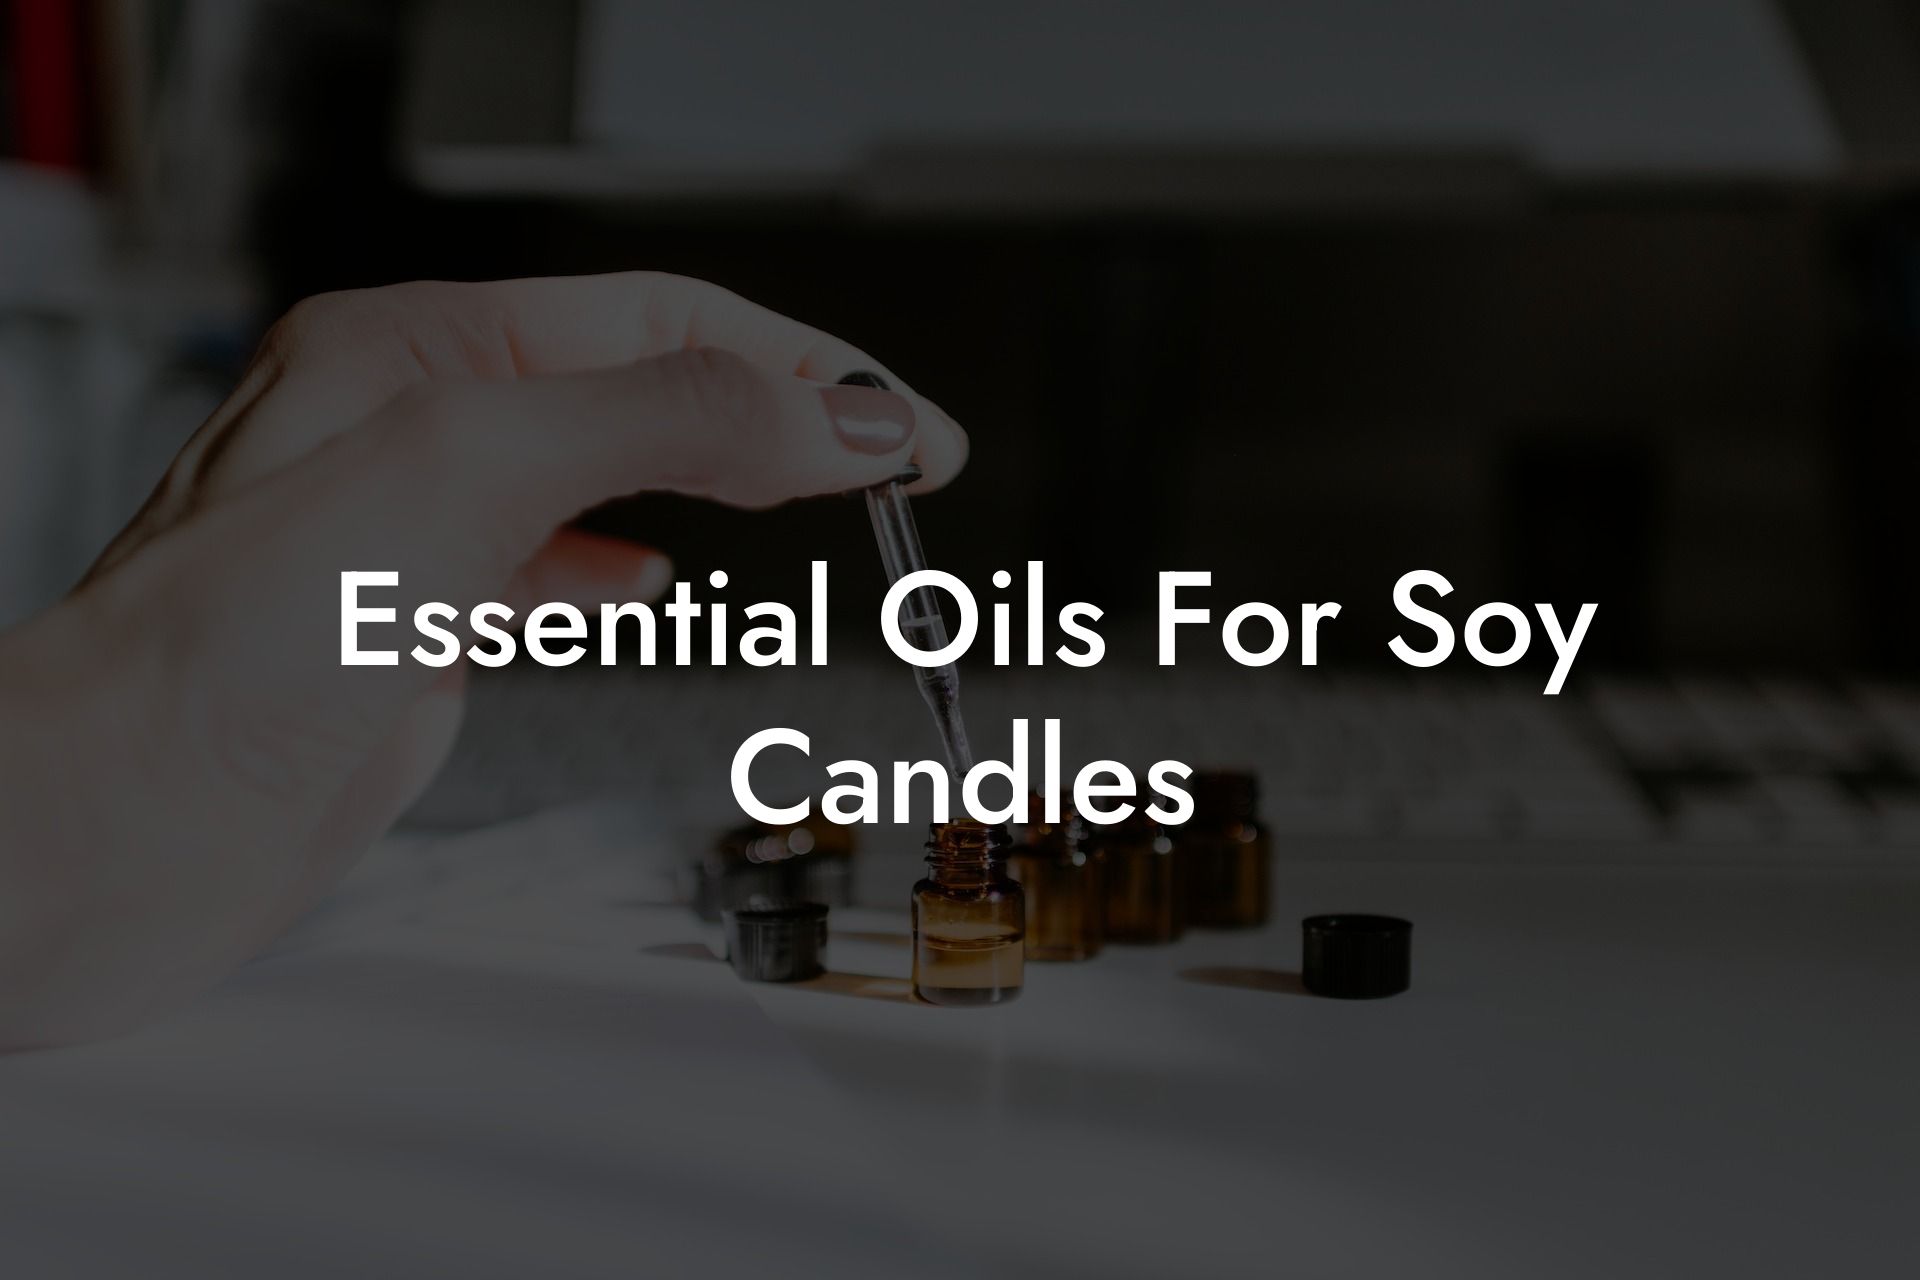 Essential Oils For Soy Candles